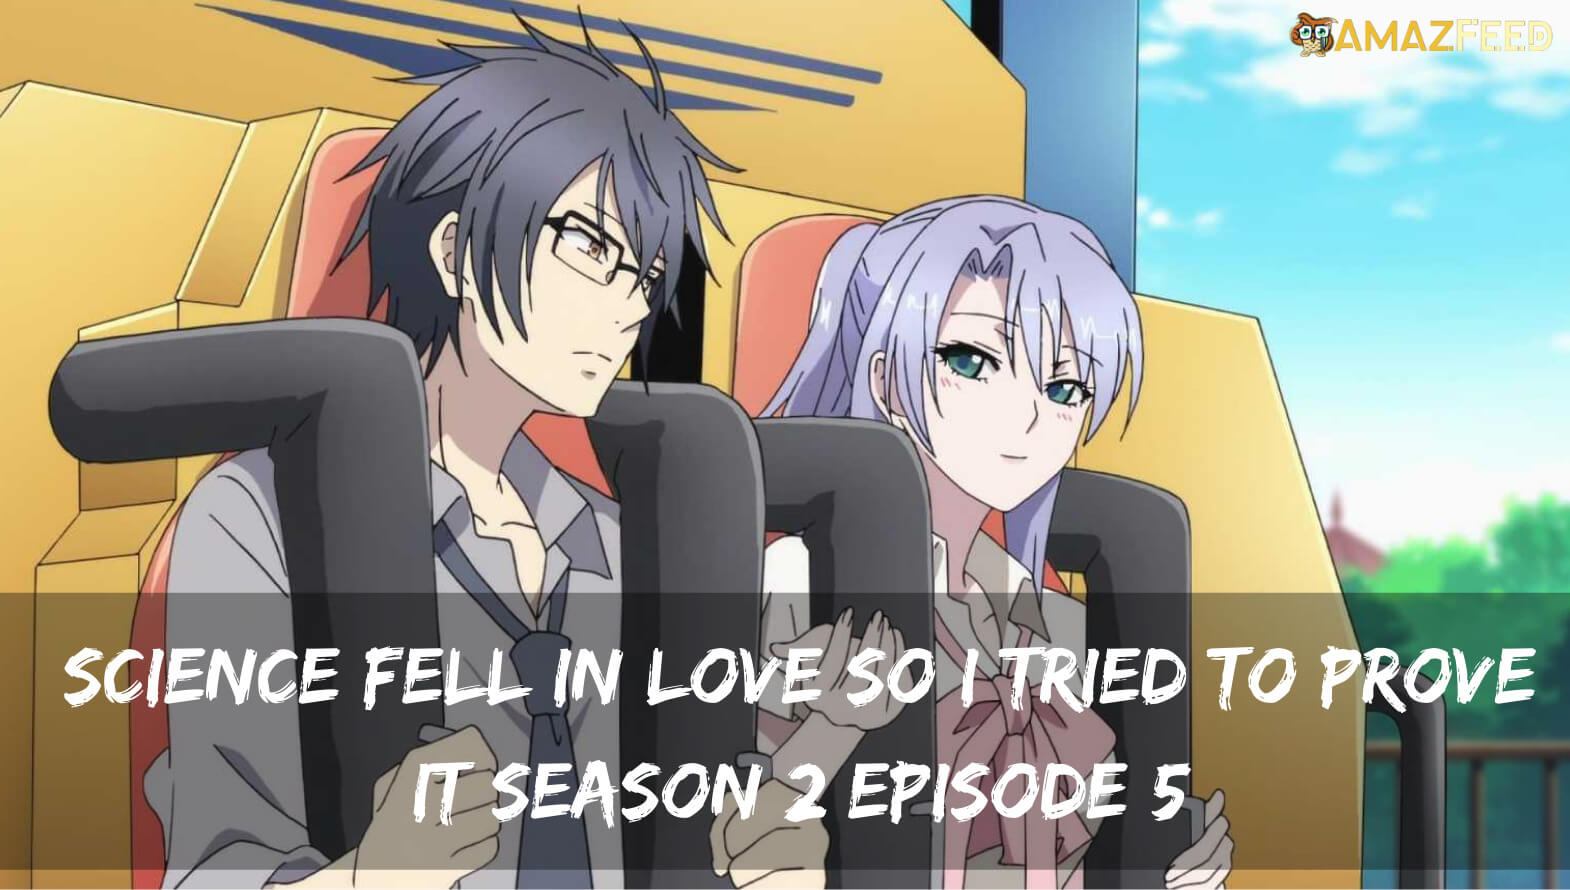 Science Fell In Love So I Tried To Prove It Season 2 Episode 5 release date